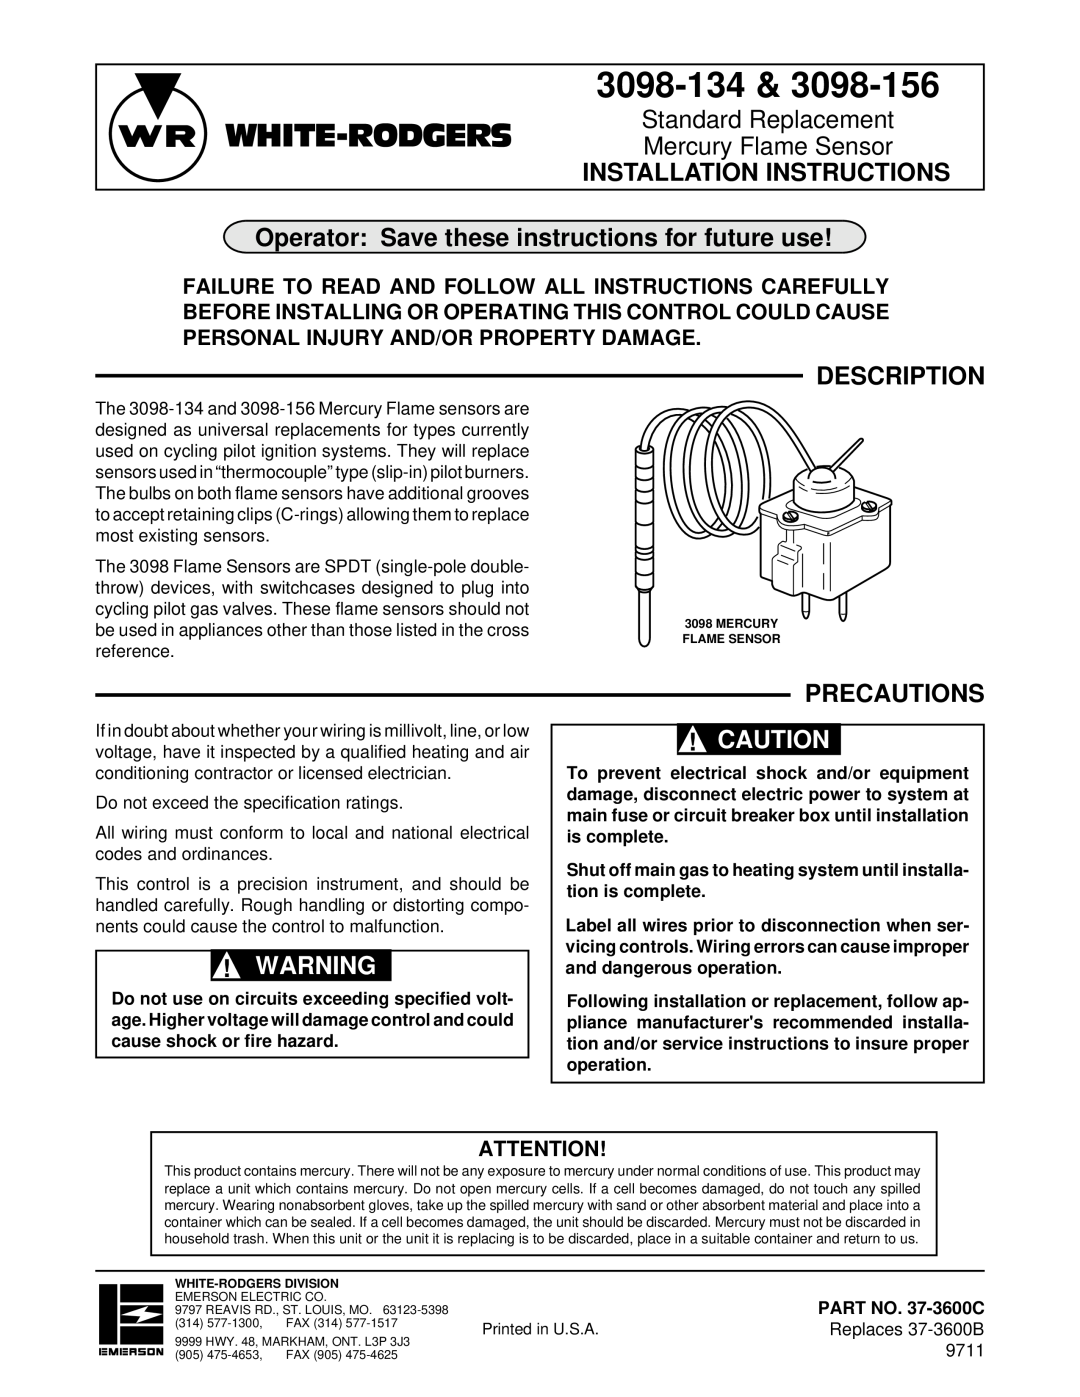 White Rodgers 3098-134 installation instructions White-Rodgers, Installation Instructions, Description, Precautions 